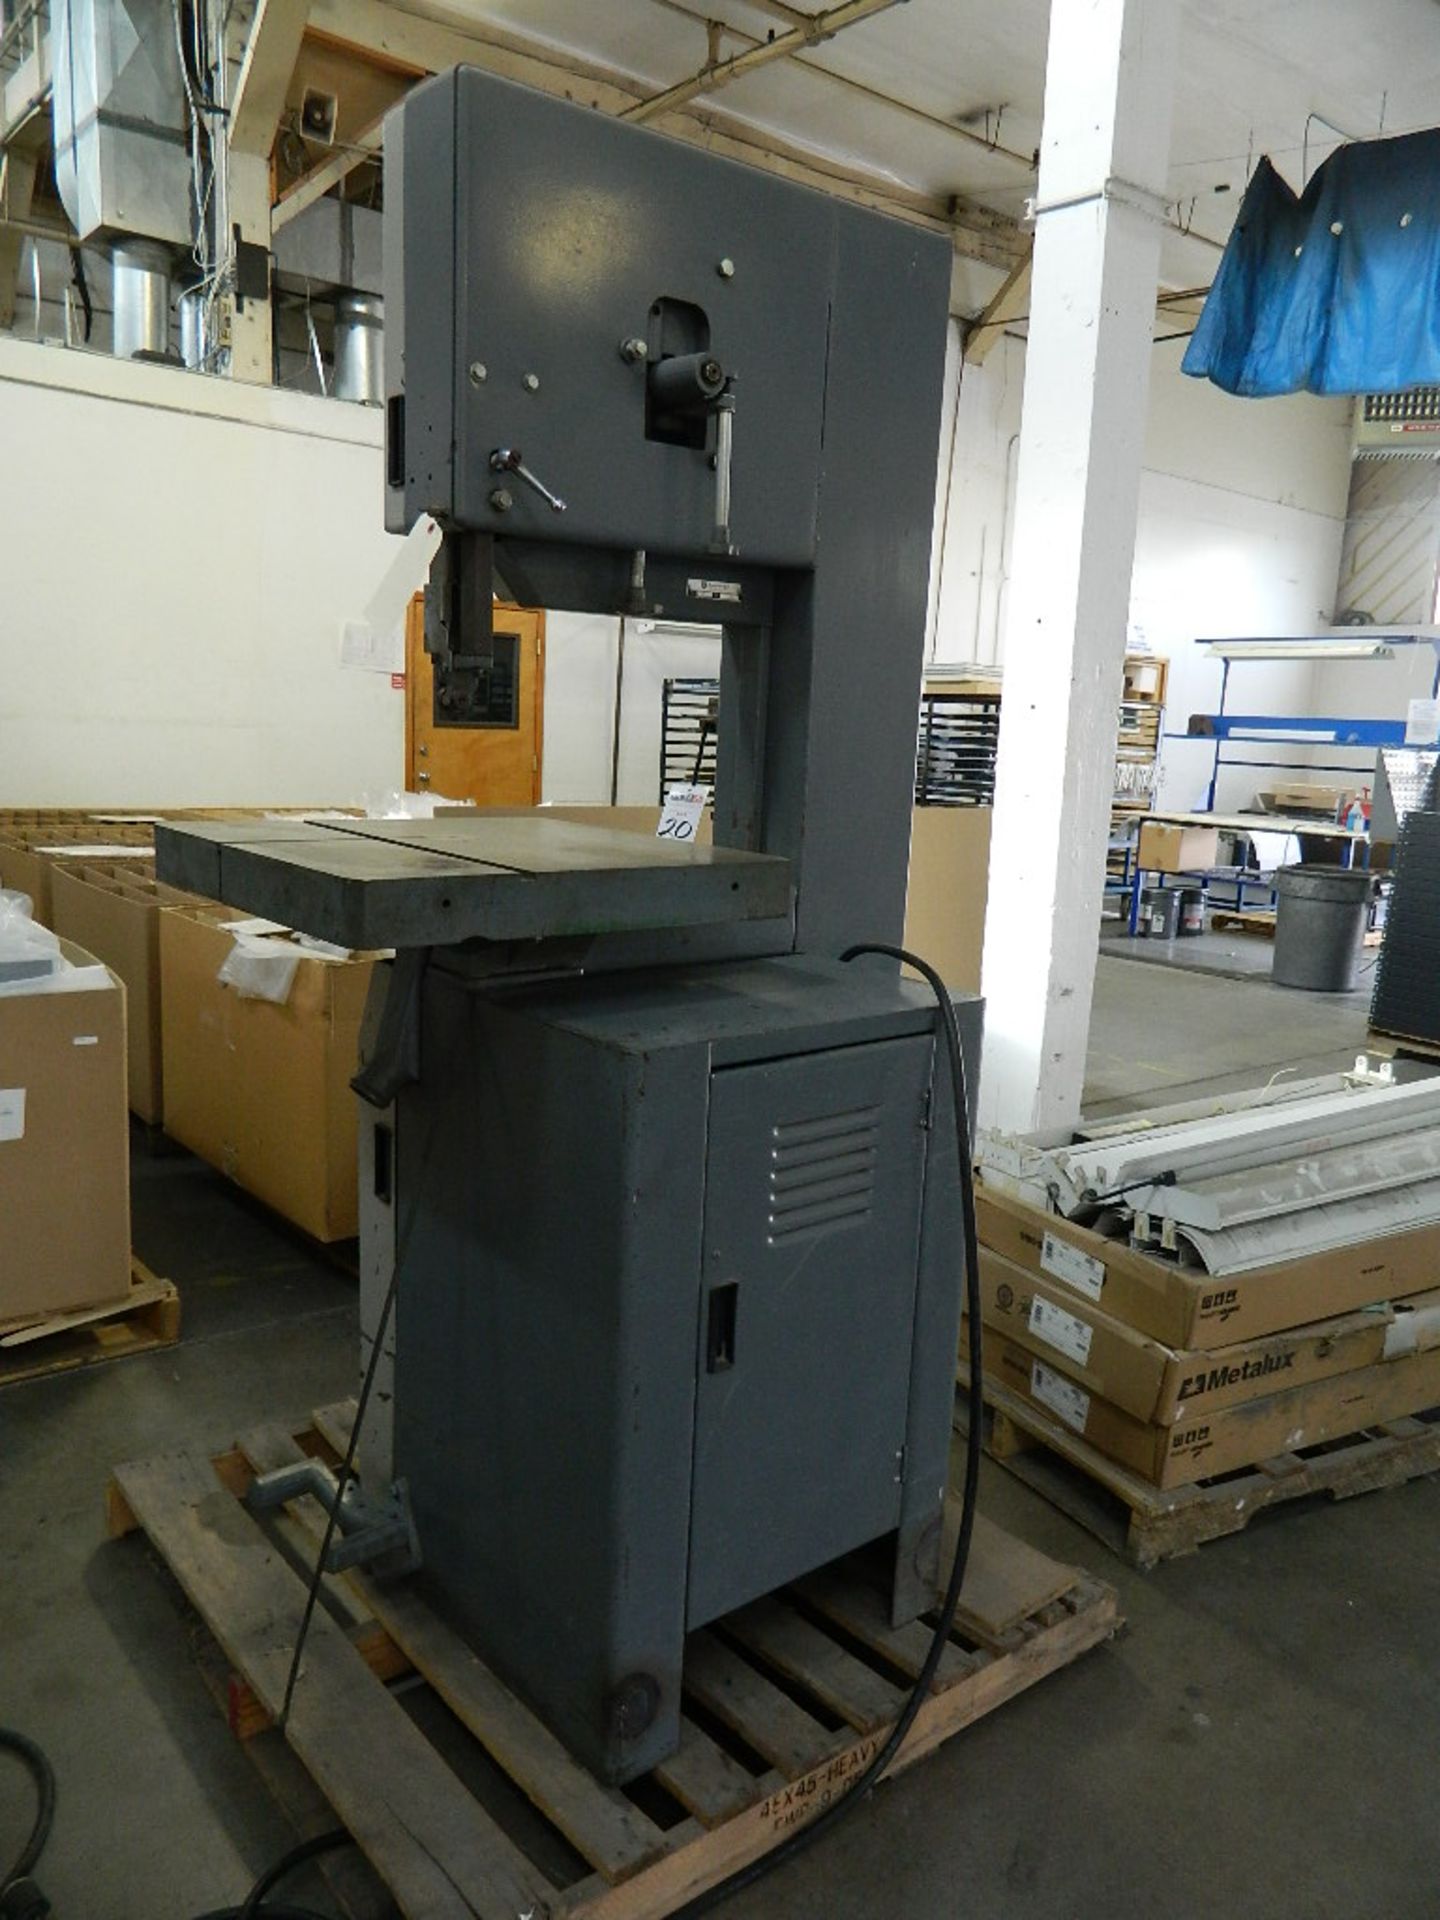 Rockwell Delta Vertical Band Saw model 28-3X5, w 24.1/4"x24.1/4" Table, 20" Throat, Blade Welder, - Image 4 of 4